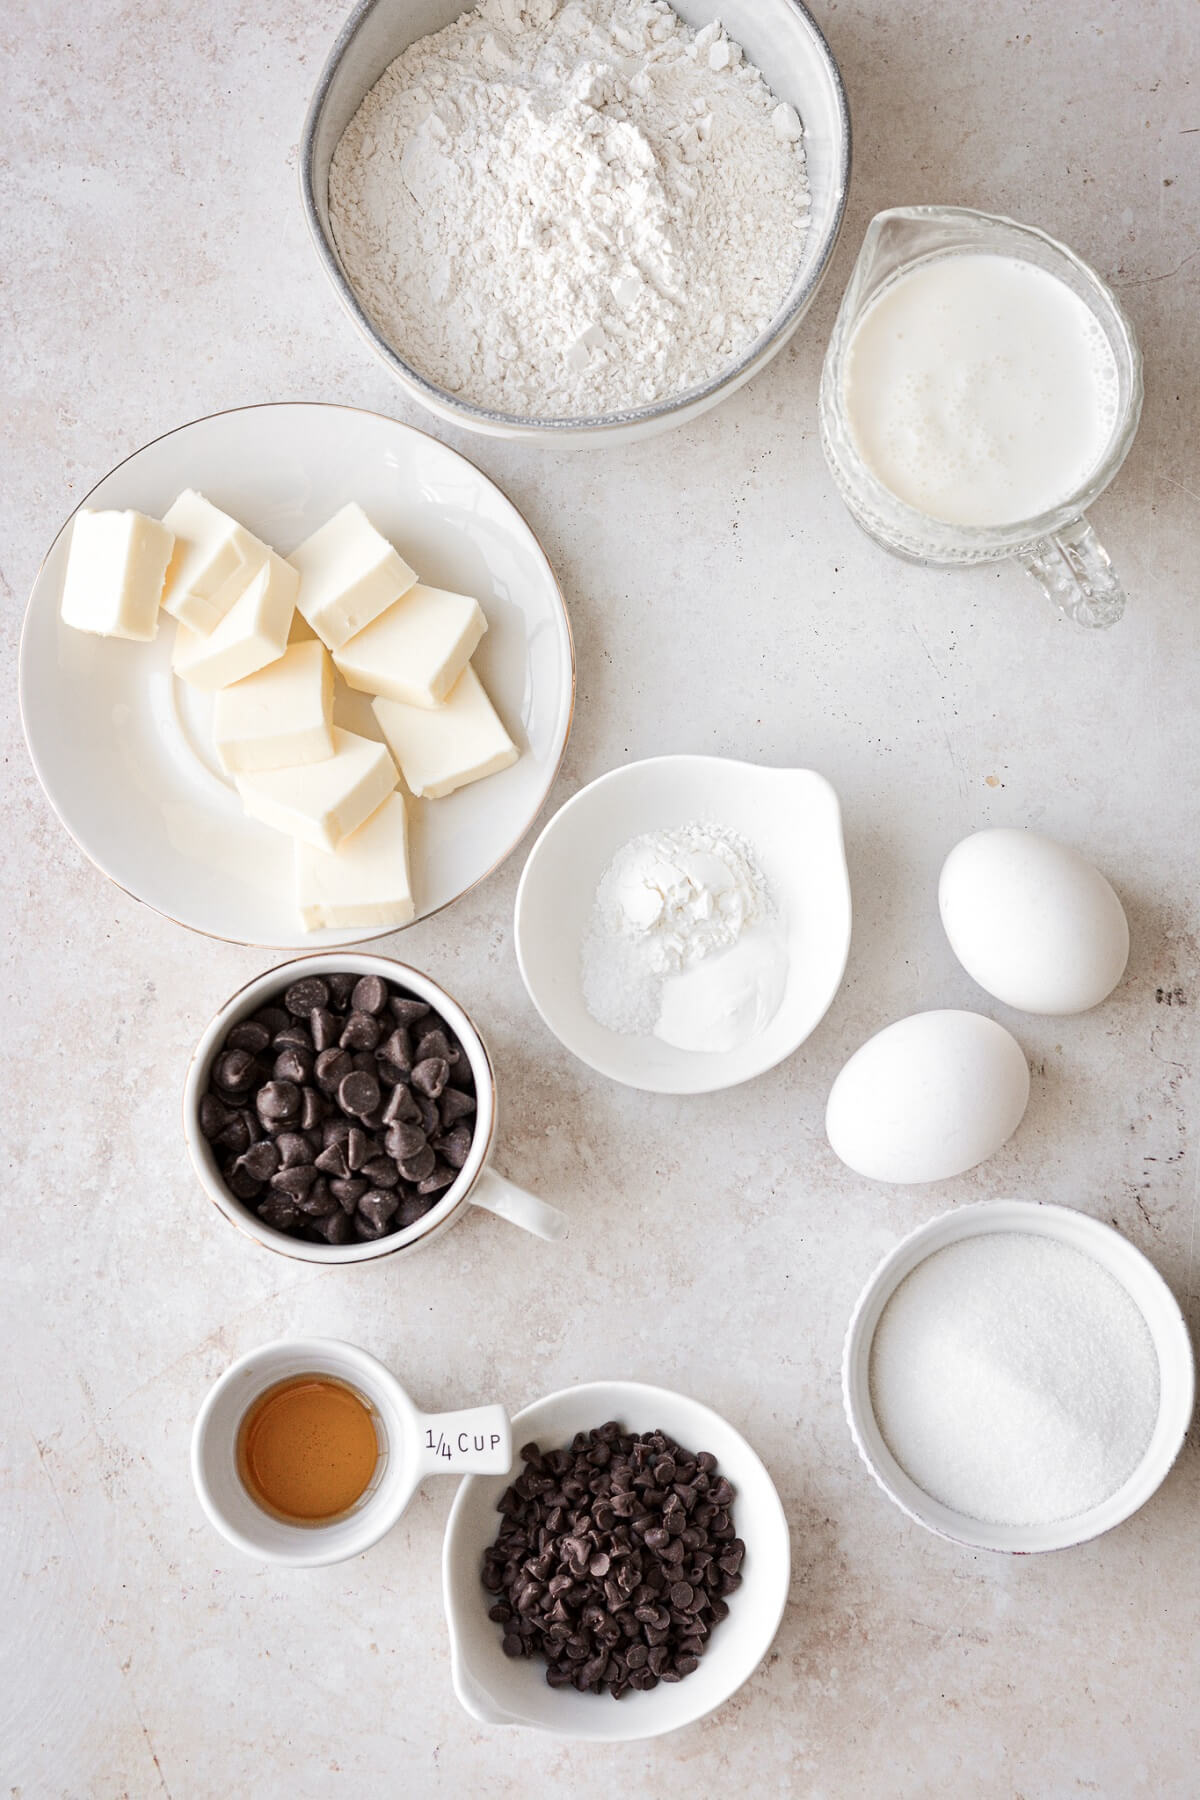 Ingredients for making chocolate chip muffins.